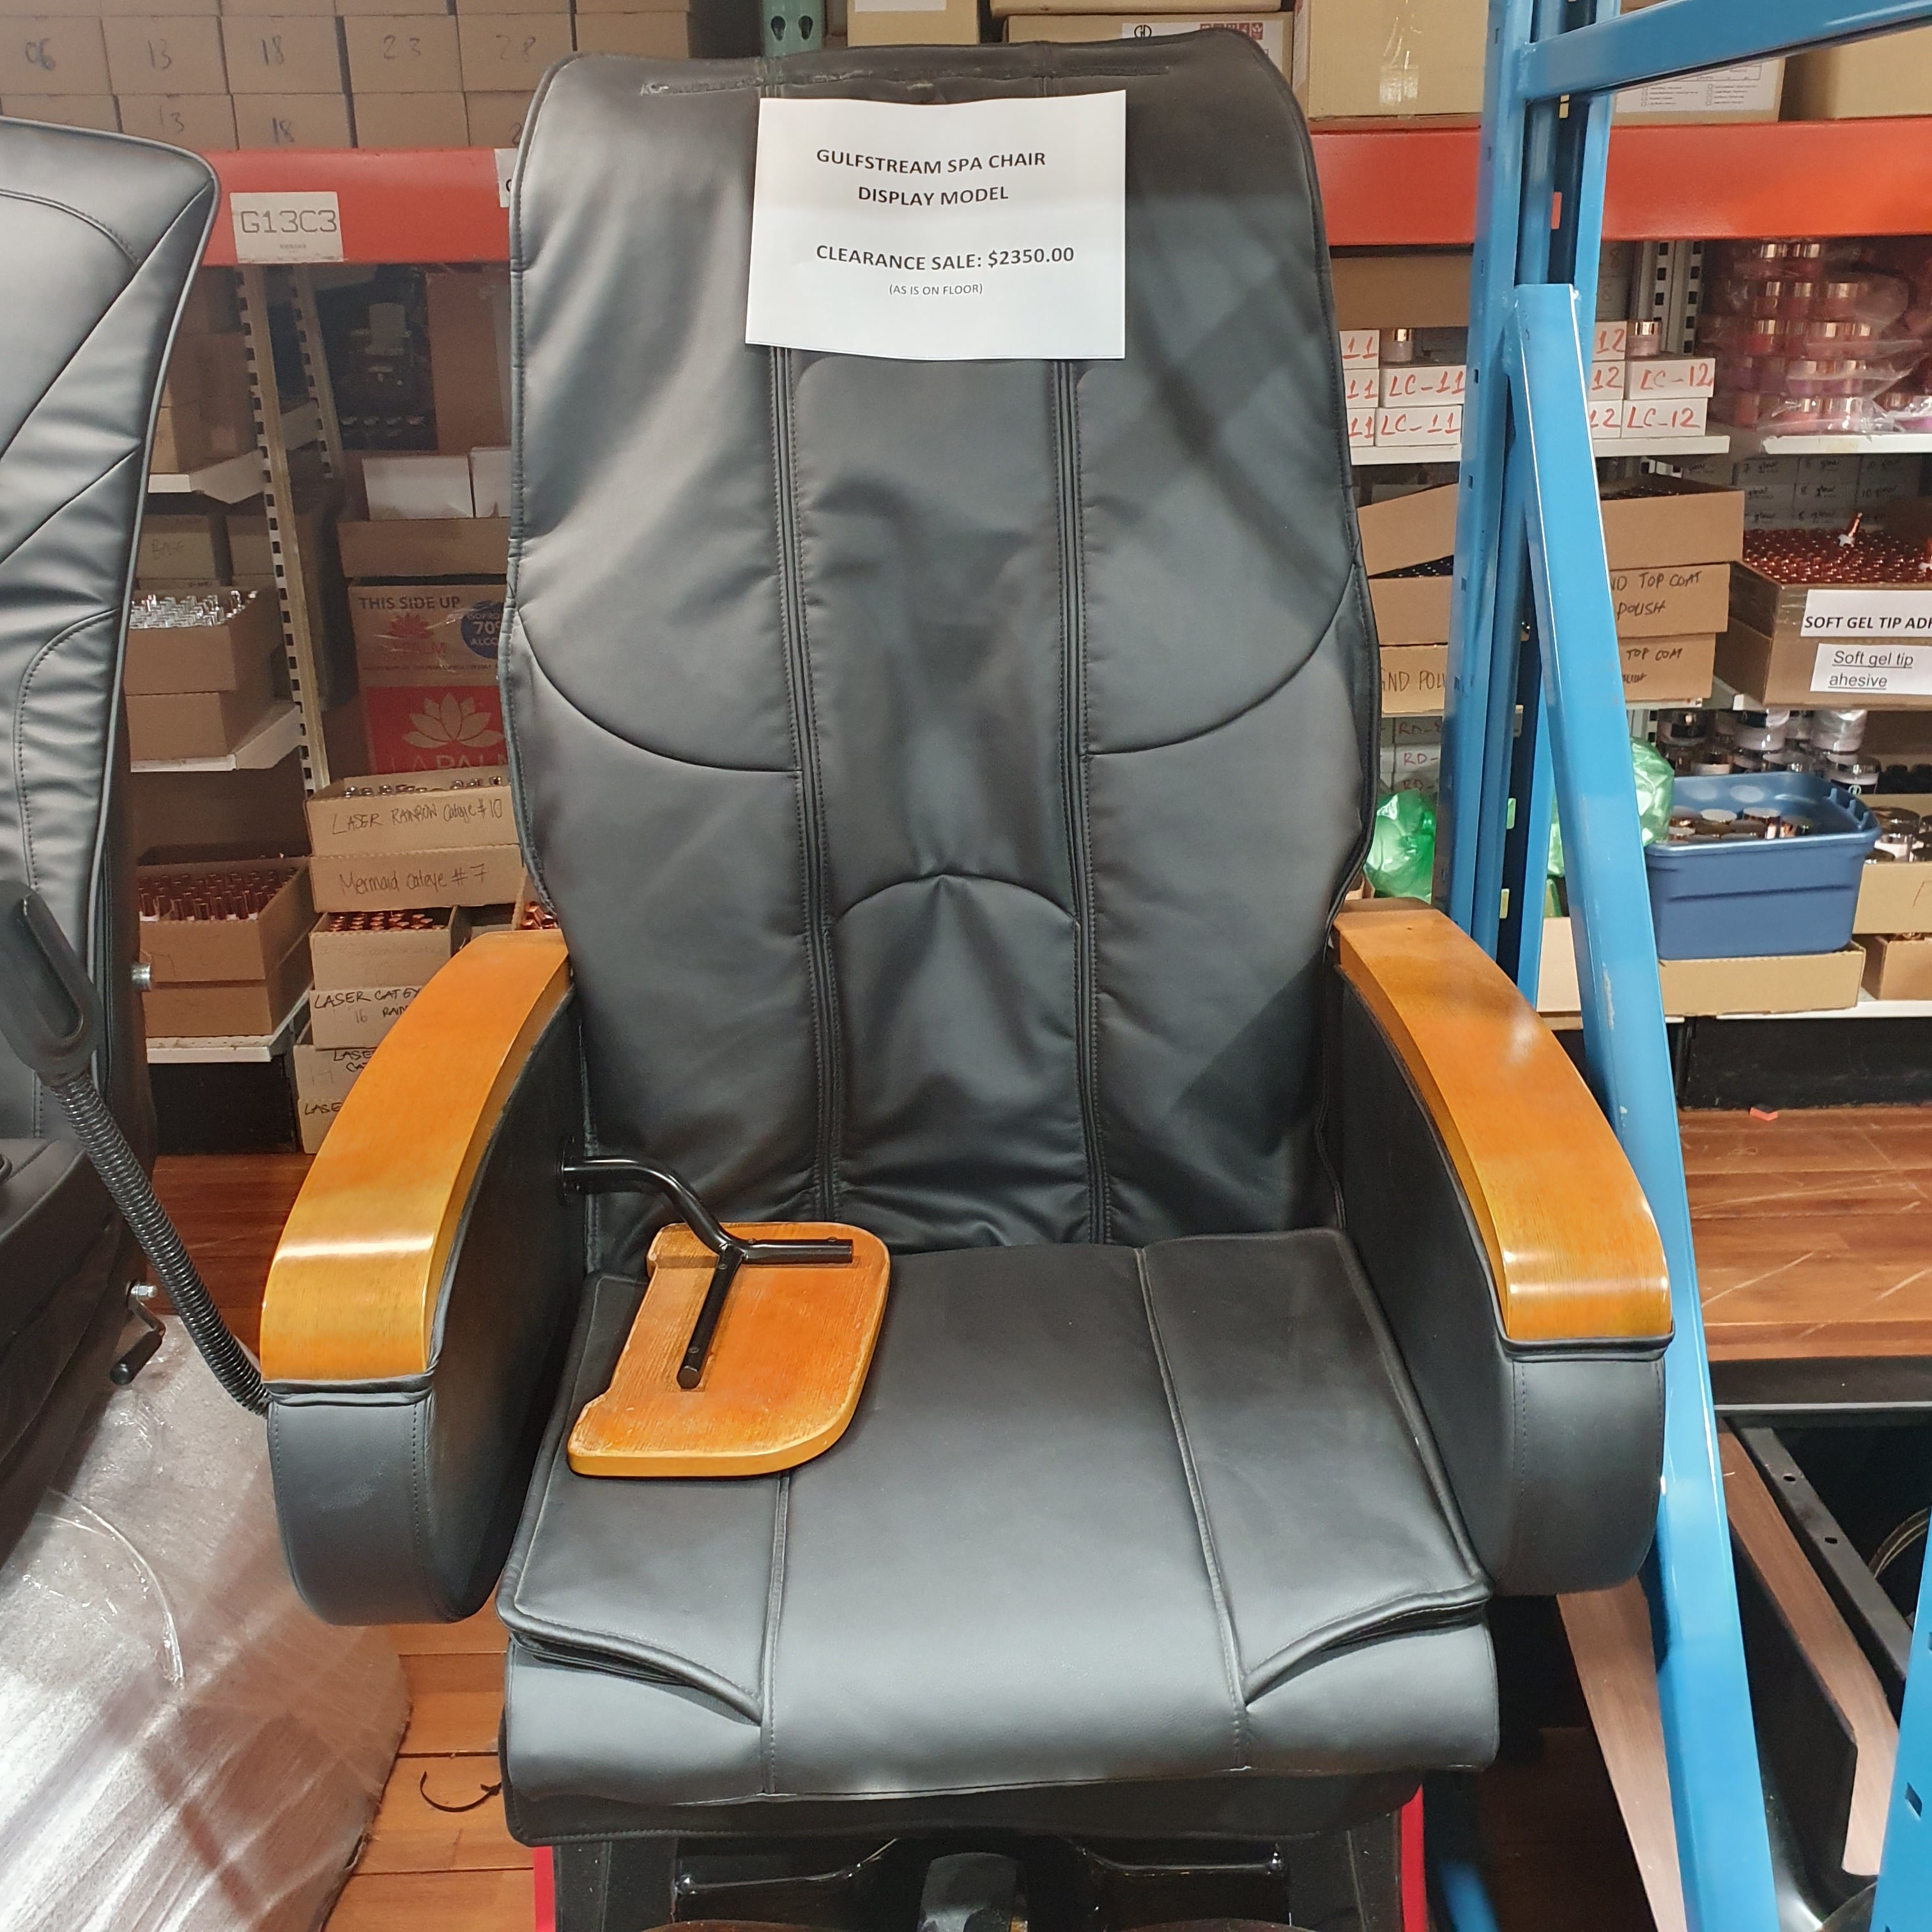 [Store pickup only] GULFSTREAM SPA CHAIR FLOOR MODEL - DISPLAY